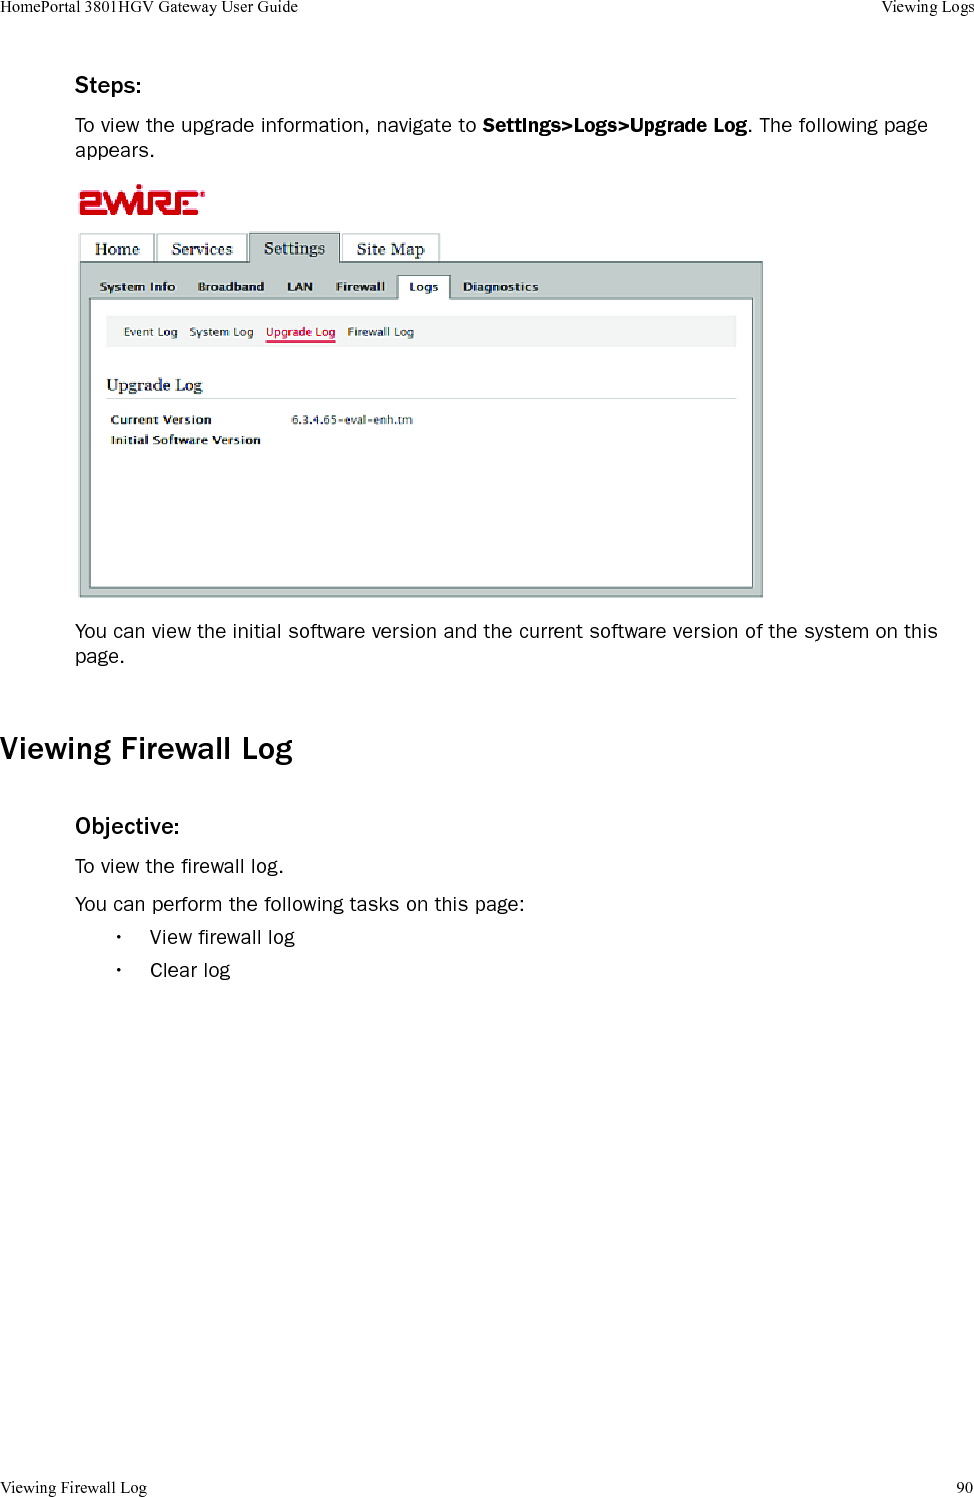 Viewing Firewall Log 90HomePortal 3801HGV Gateway User Guide Viewing LogsSteps:To view the upgrade information, navigate to Settings&gt;Logs&gt;Upgrade Log. The following page appears.You can view the initial software version and the current software version of the system on this page.Viewing Firewall LogObjective:To view the firewall log.You can perform the following tasks on this page:• View firewall log• Clear log